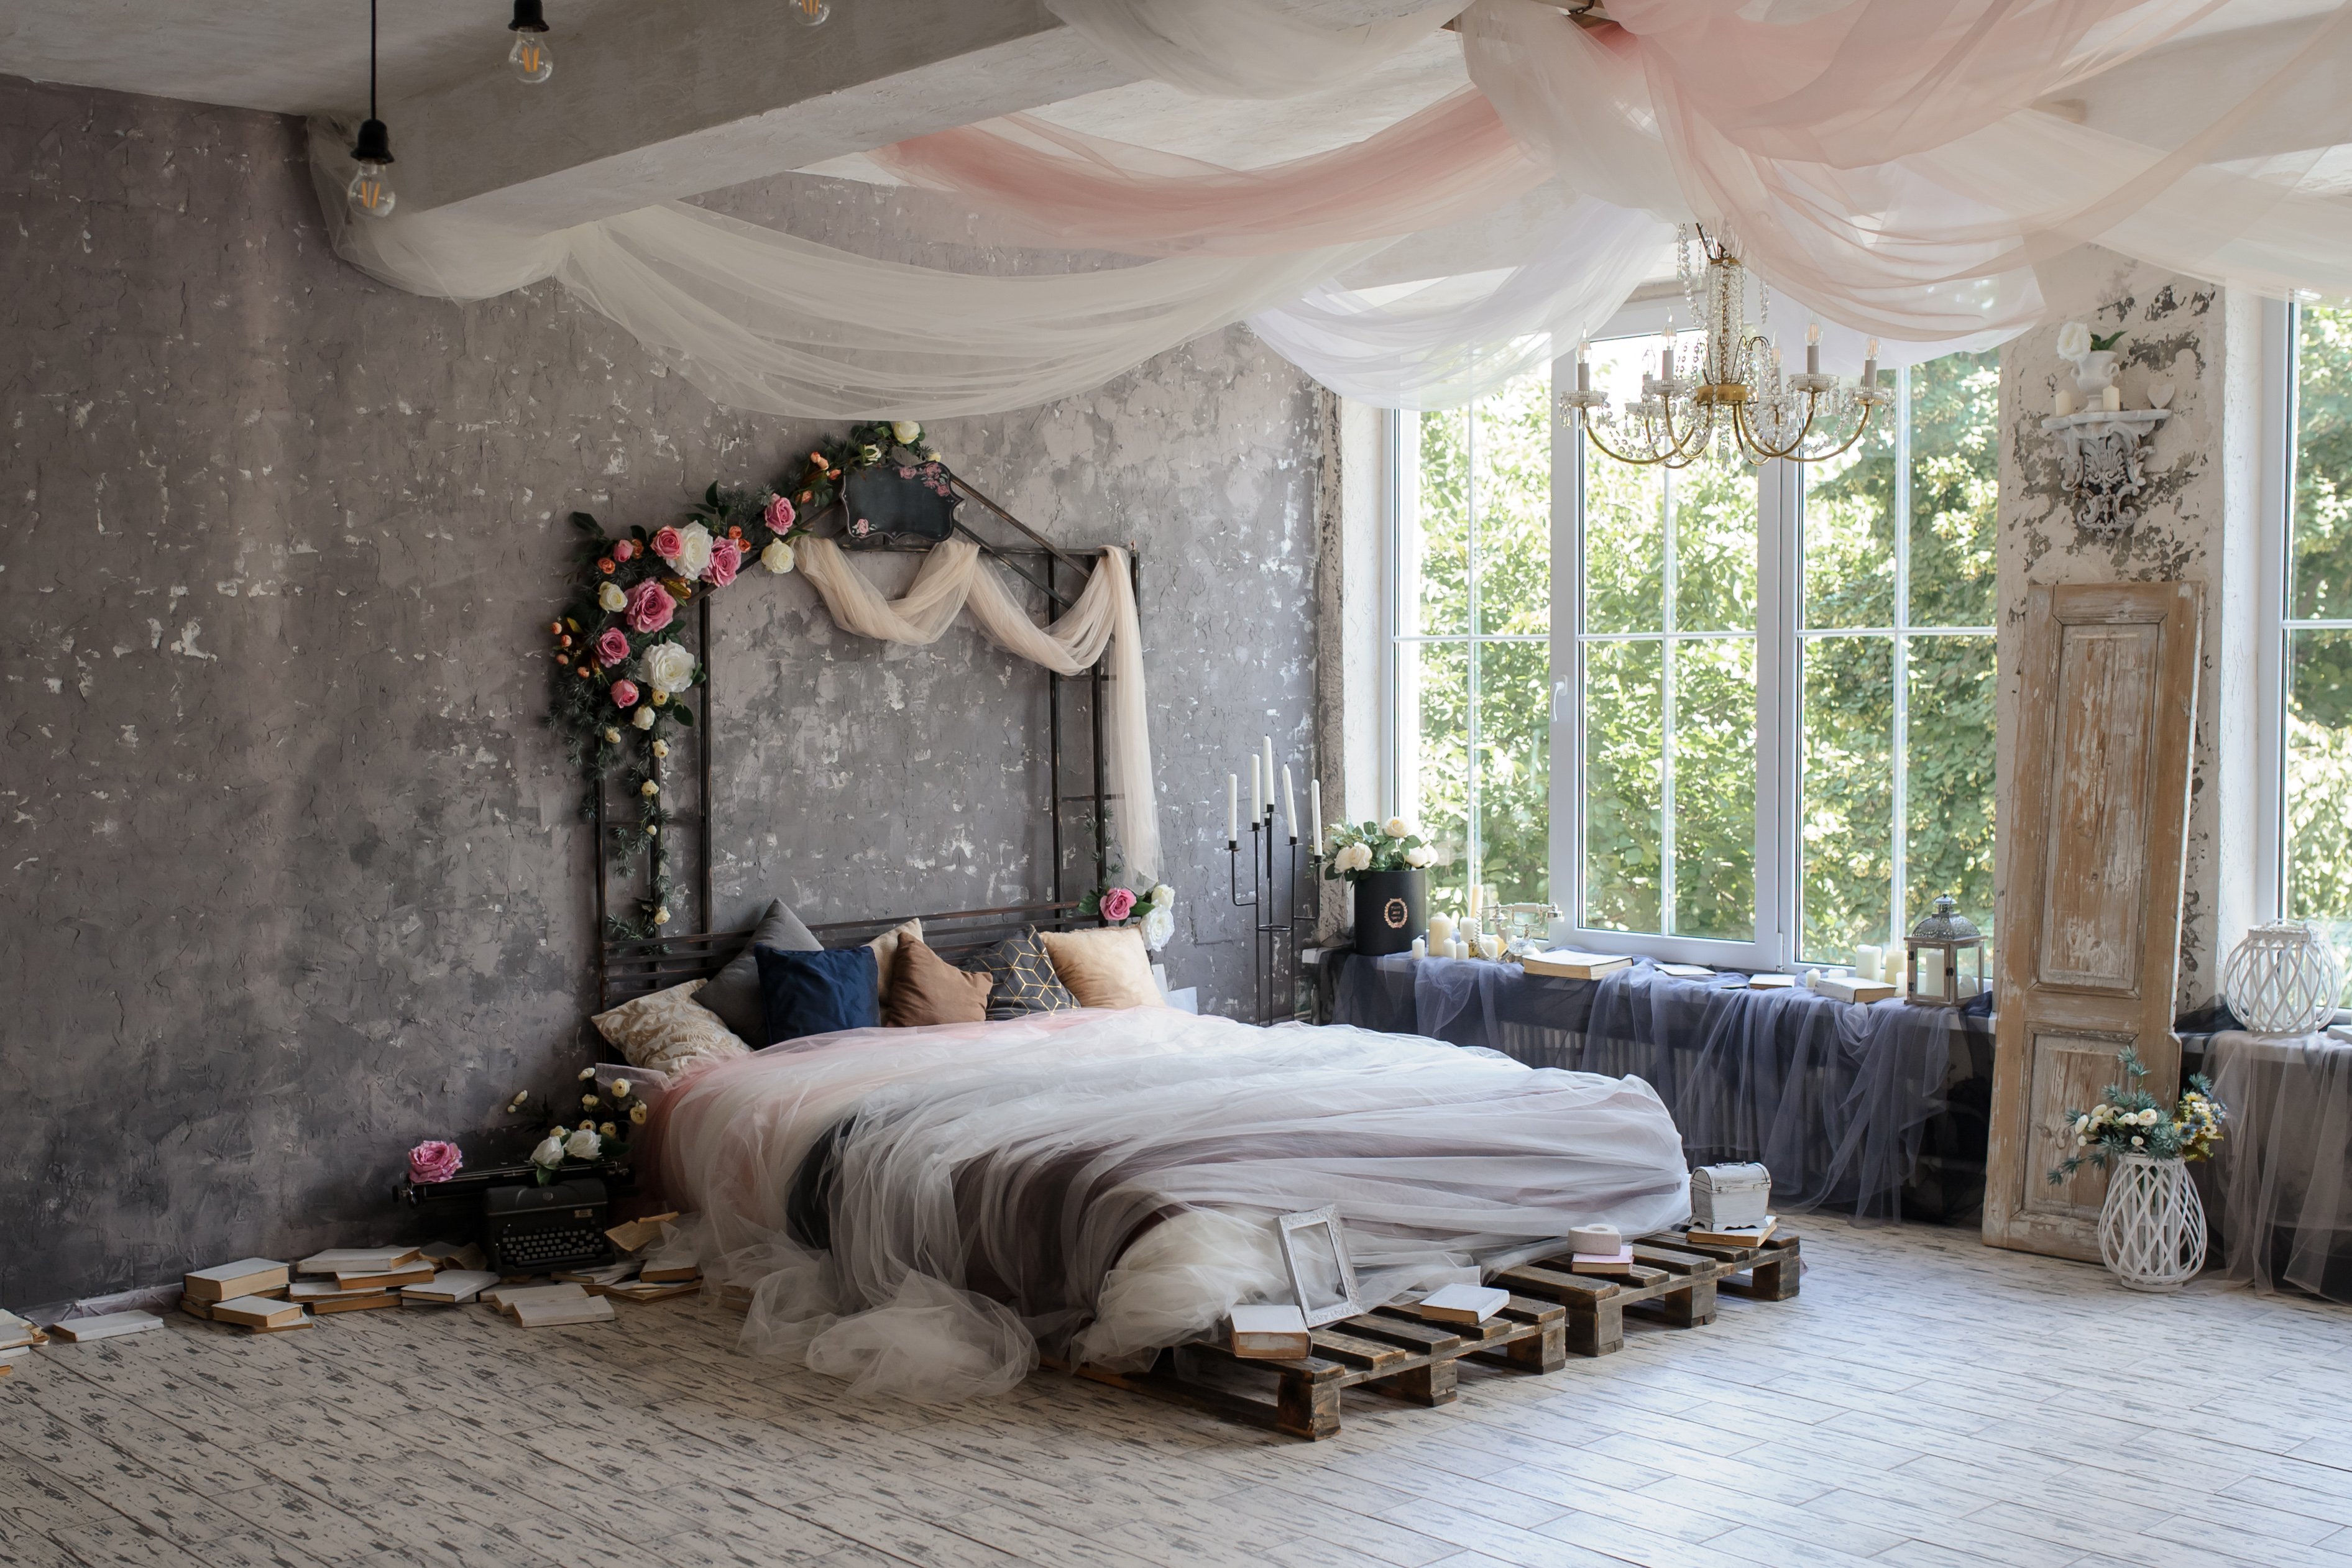 Romantic Wall Painting Designs for Your Bedroom - HomeLane Blog